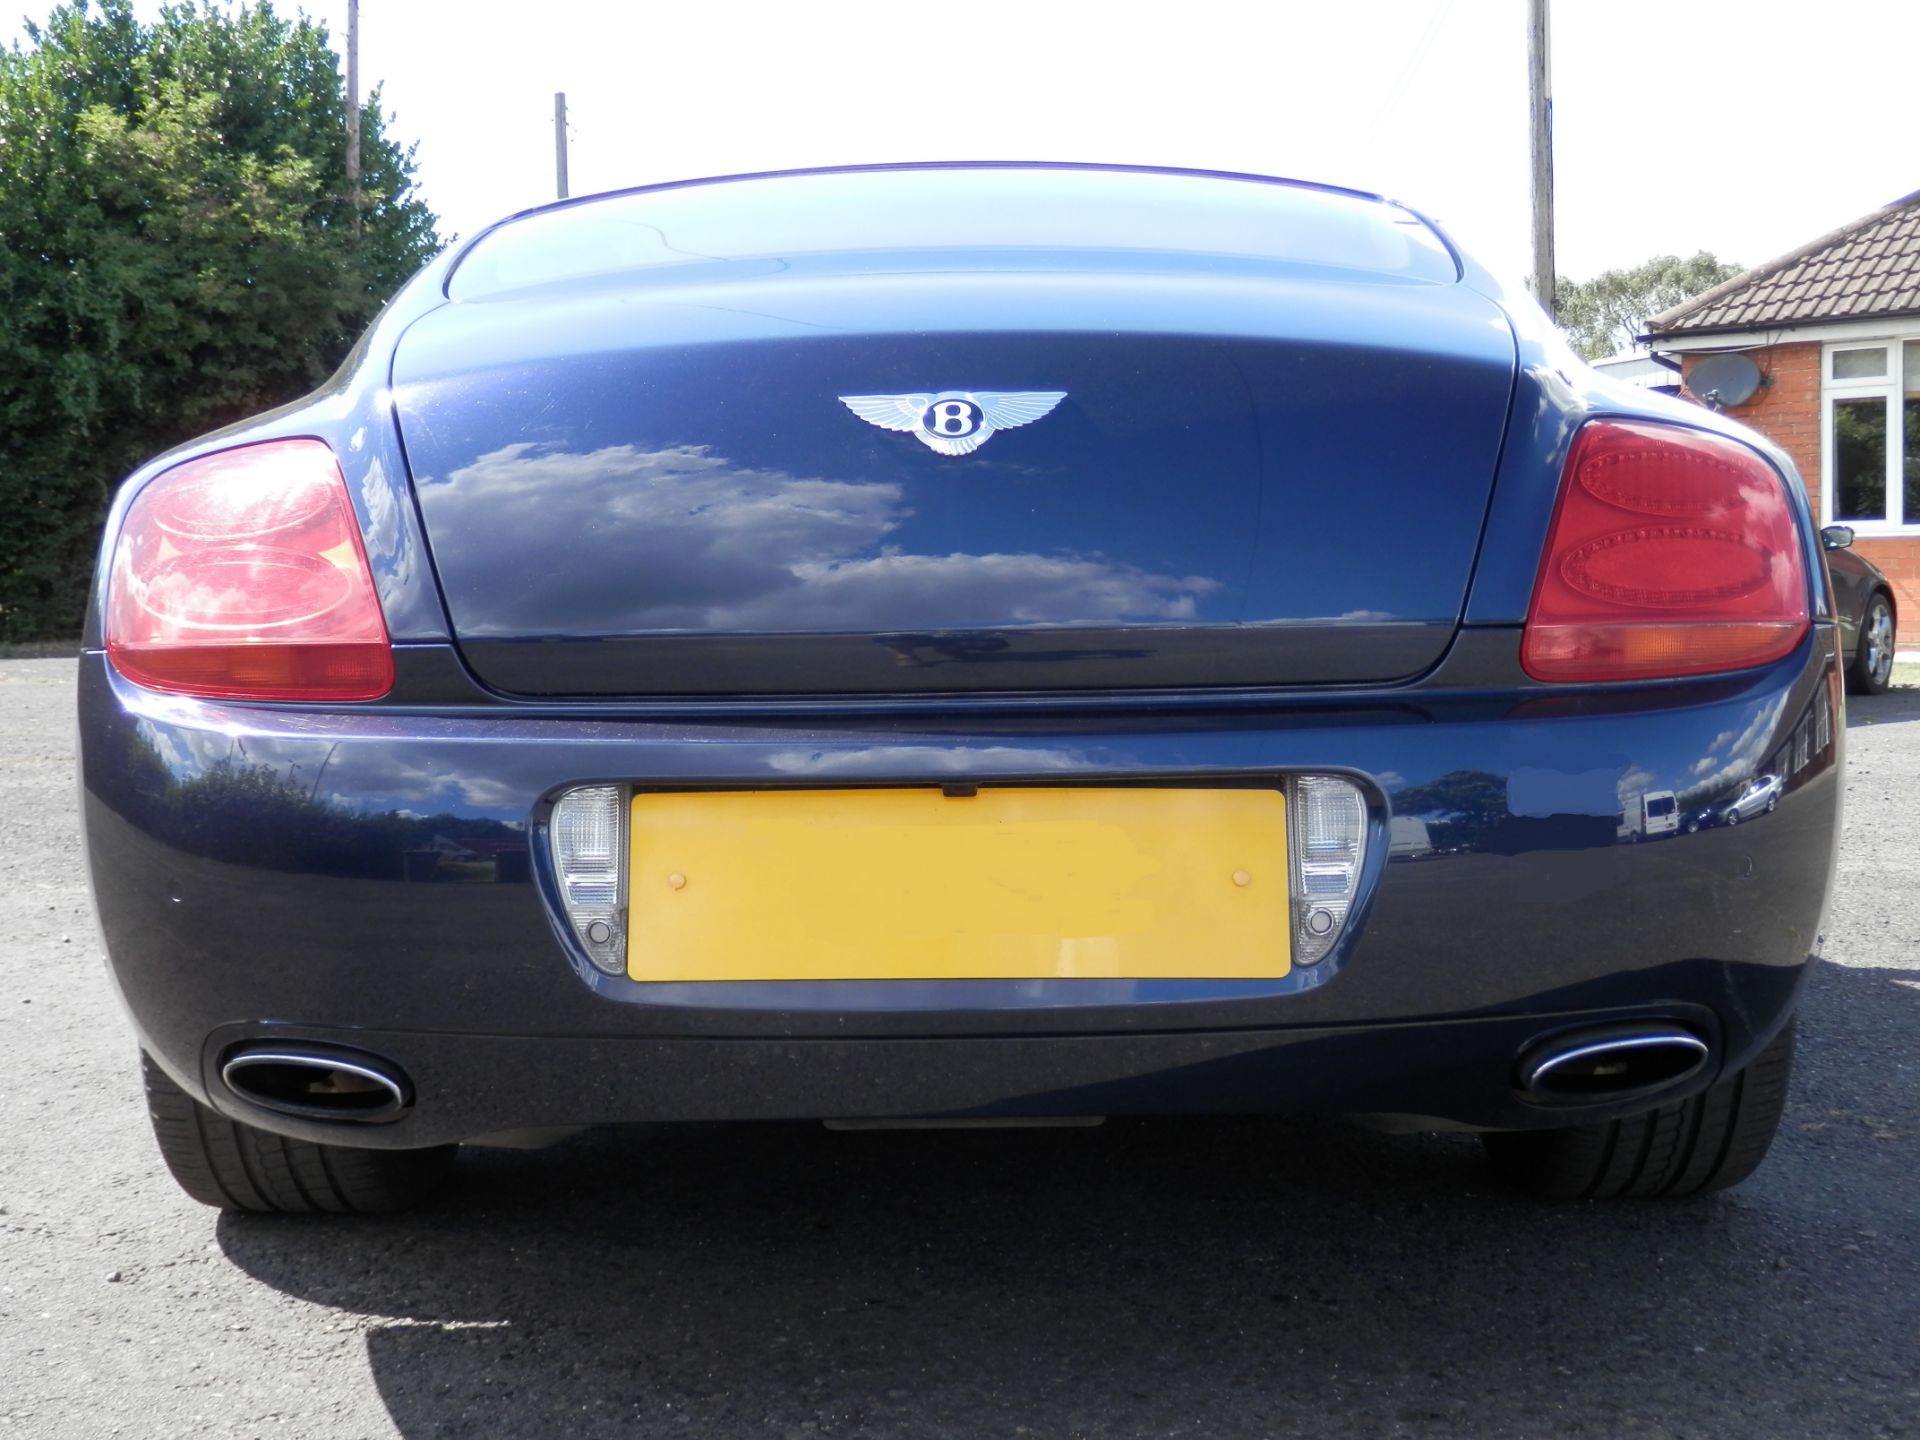 STUNNING 2007 BENTLEY GT CONTINENTAL, 6.0L TWIN TURBO,35K MILES, BLUE, CREAM LEATHER, FULL HISTORY. - Image 3 of 53